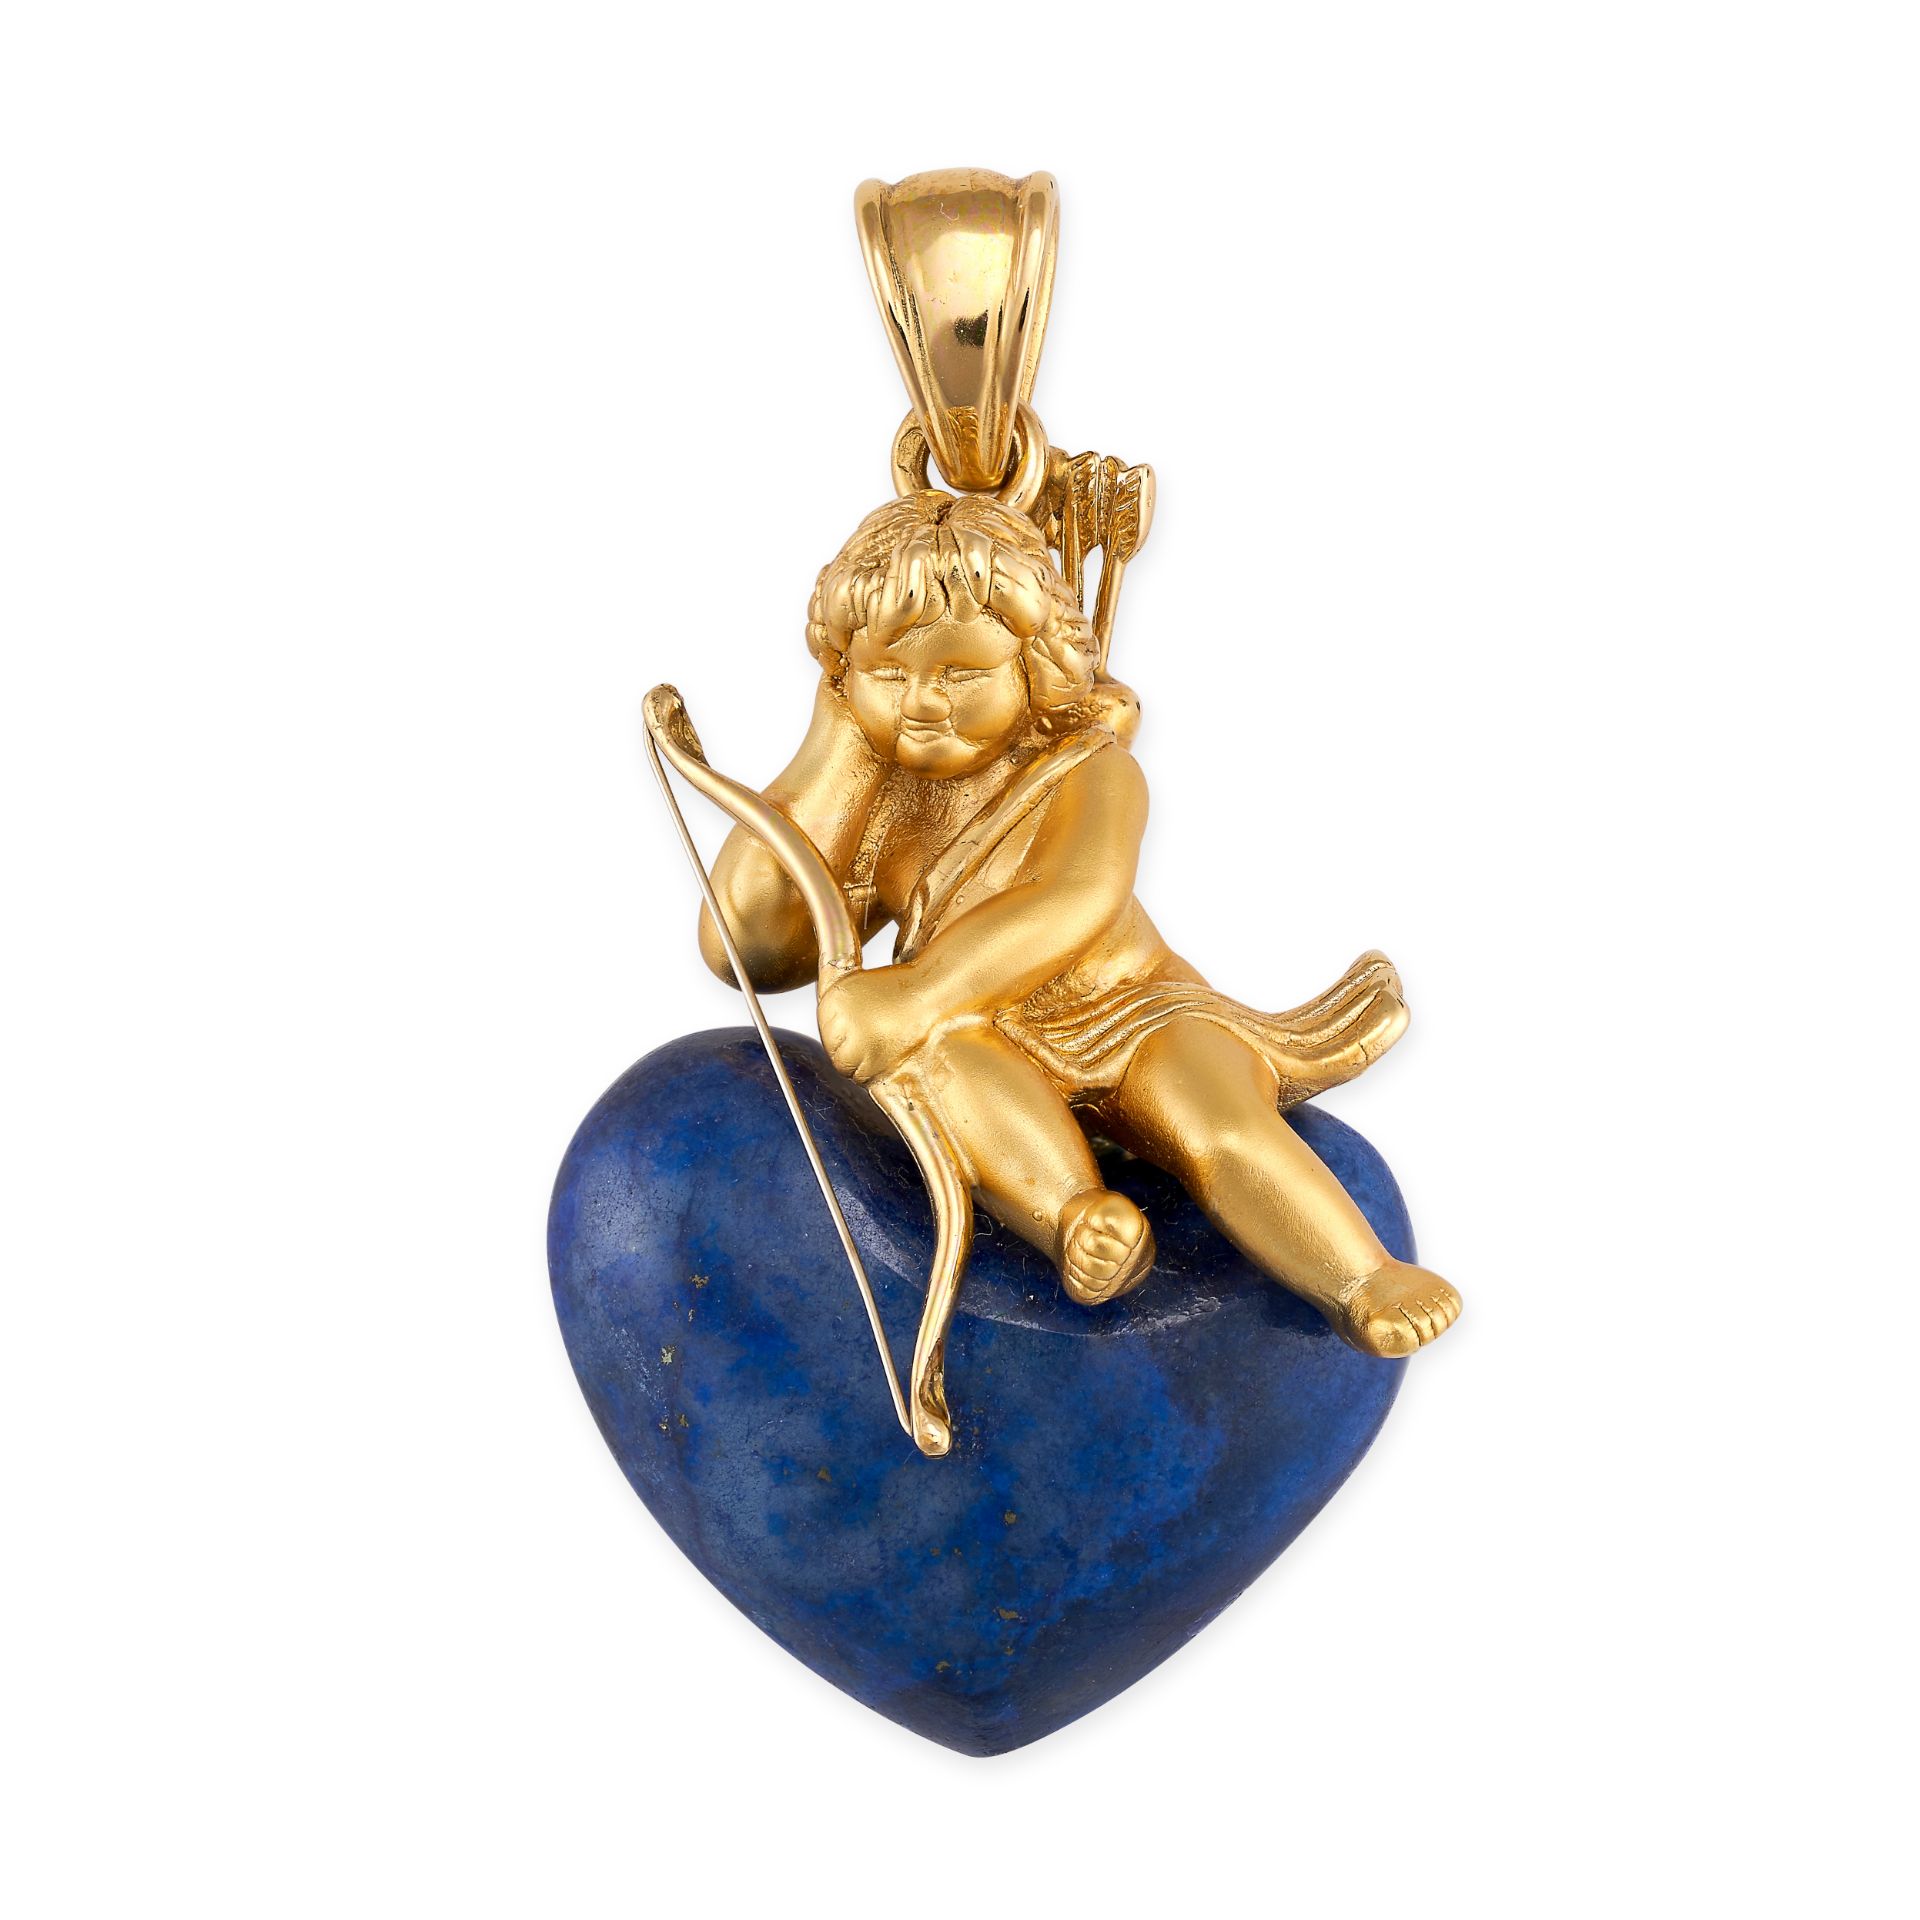 A FRENCH LAPIS LAZULI CUPID HEART PENDANT in 18ct yellow gold, the pendant designed as Cupid resting